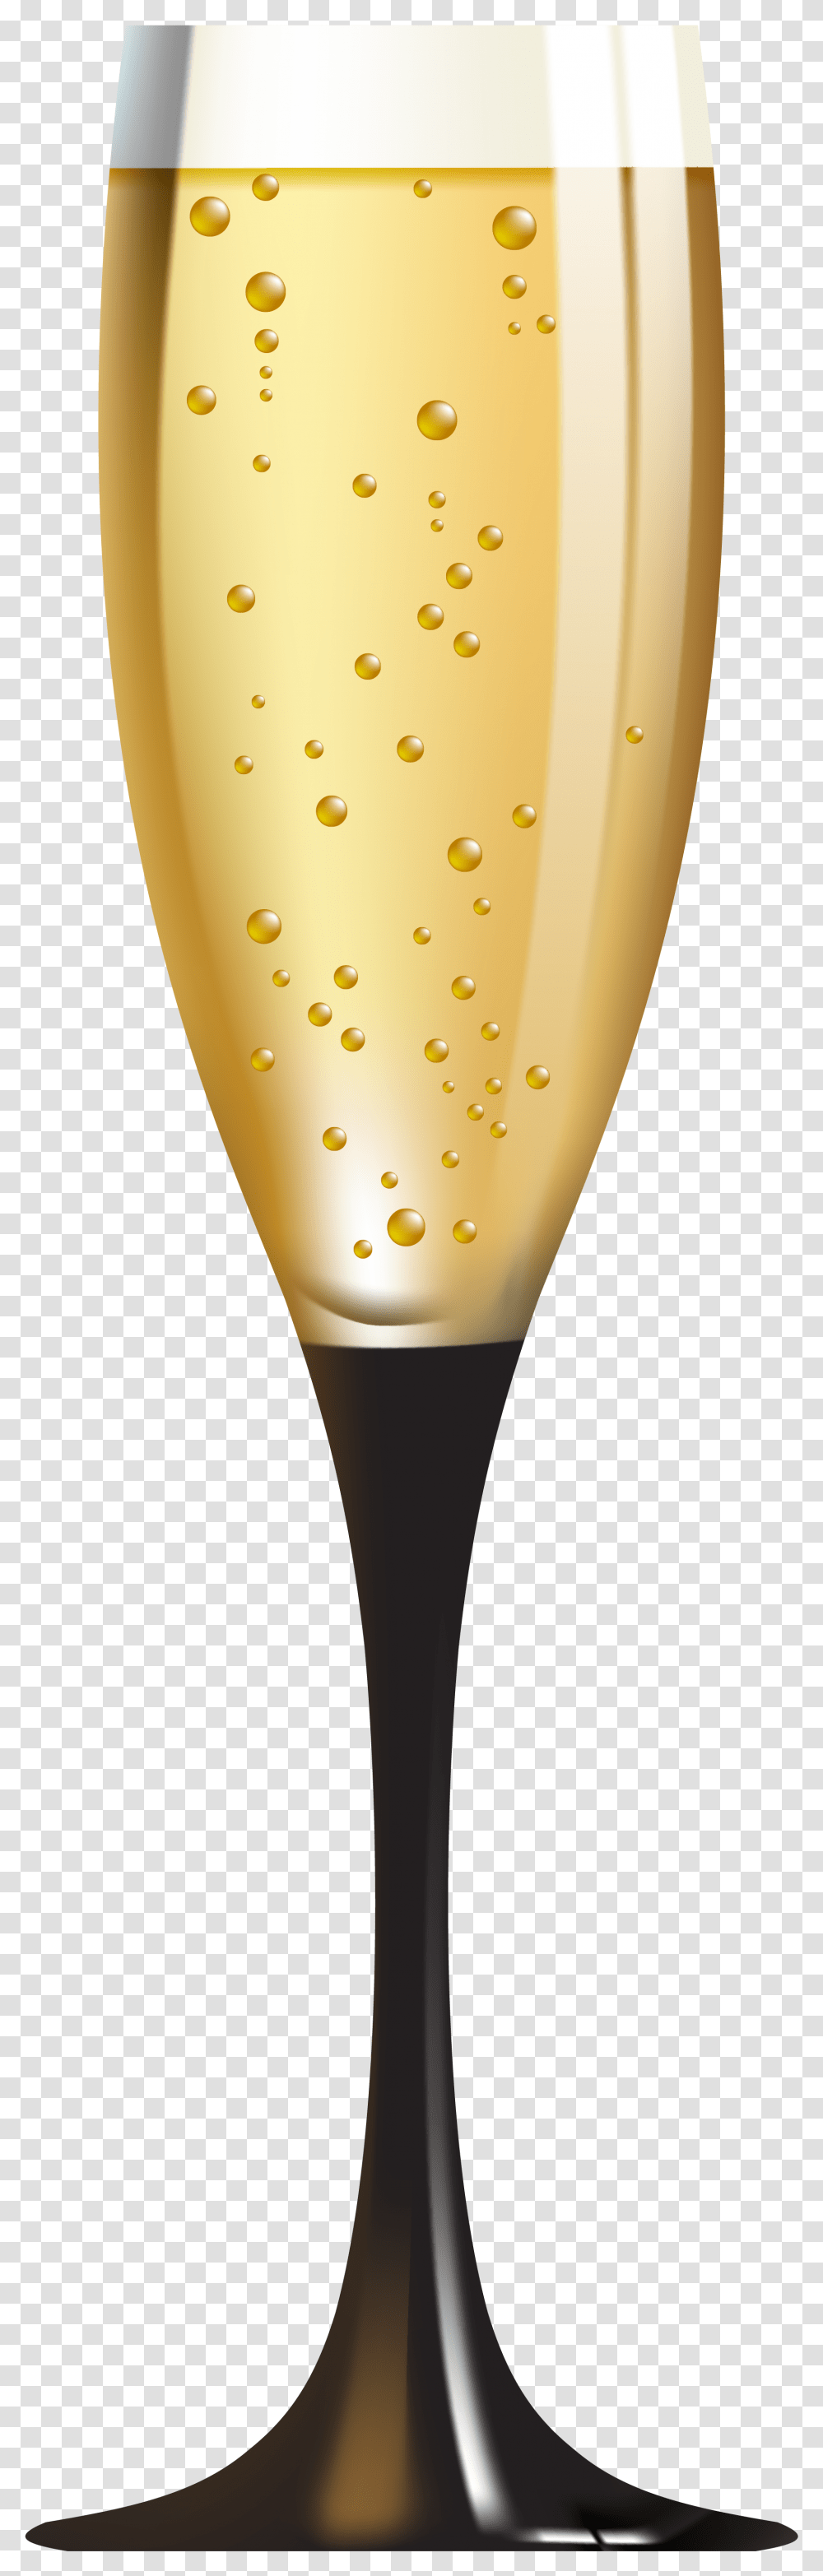 Champagne Free Image Background Champagne Glass Clipart, Beer, Alcohol, Beverage, Drink Transparent Png